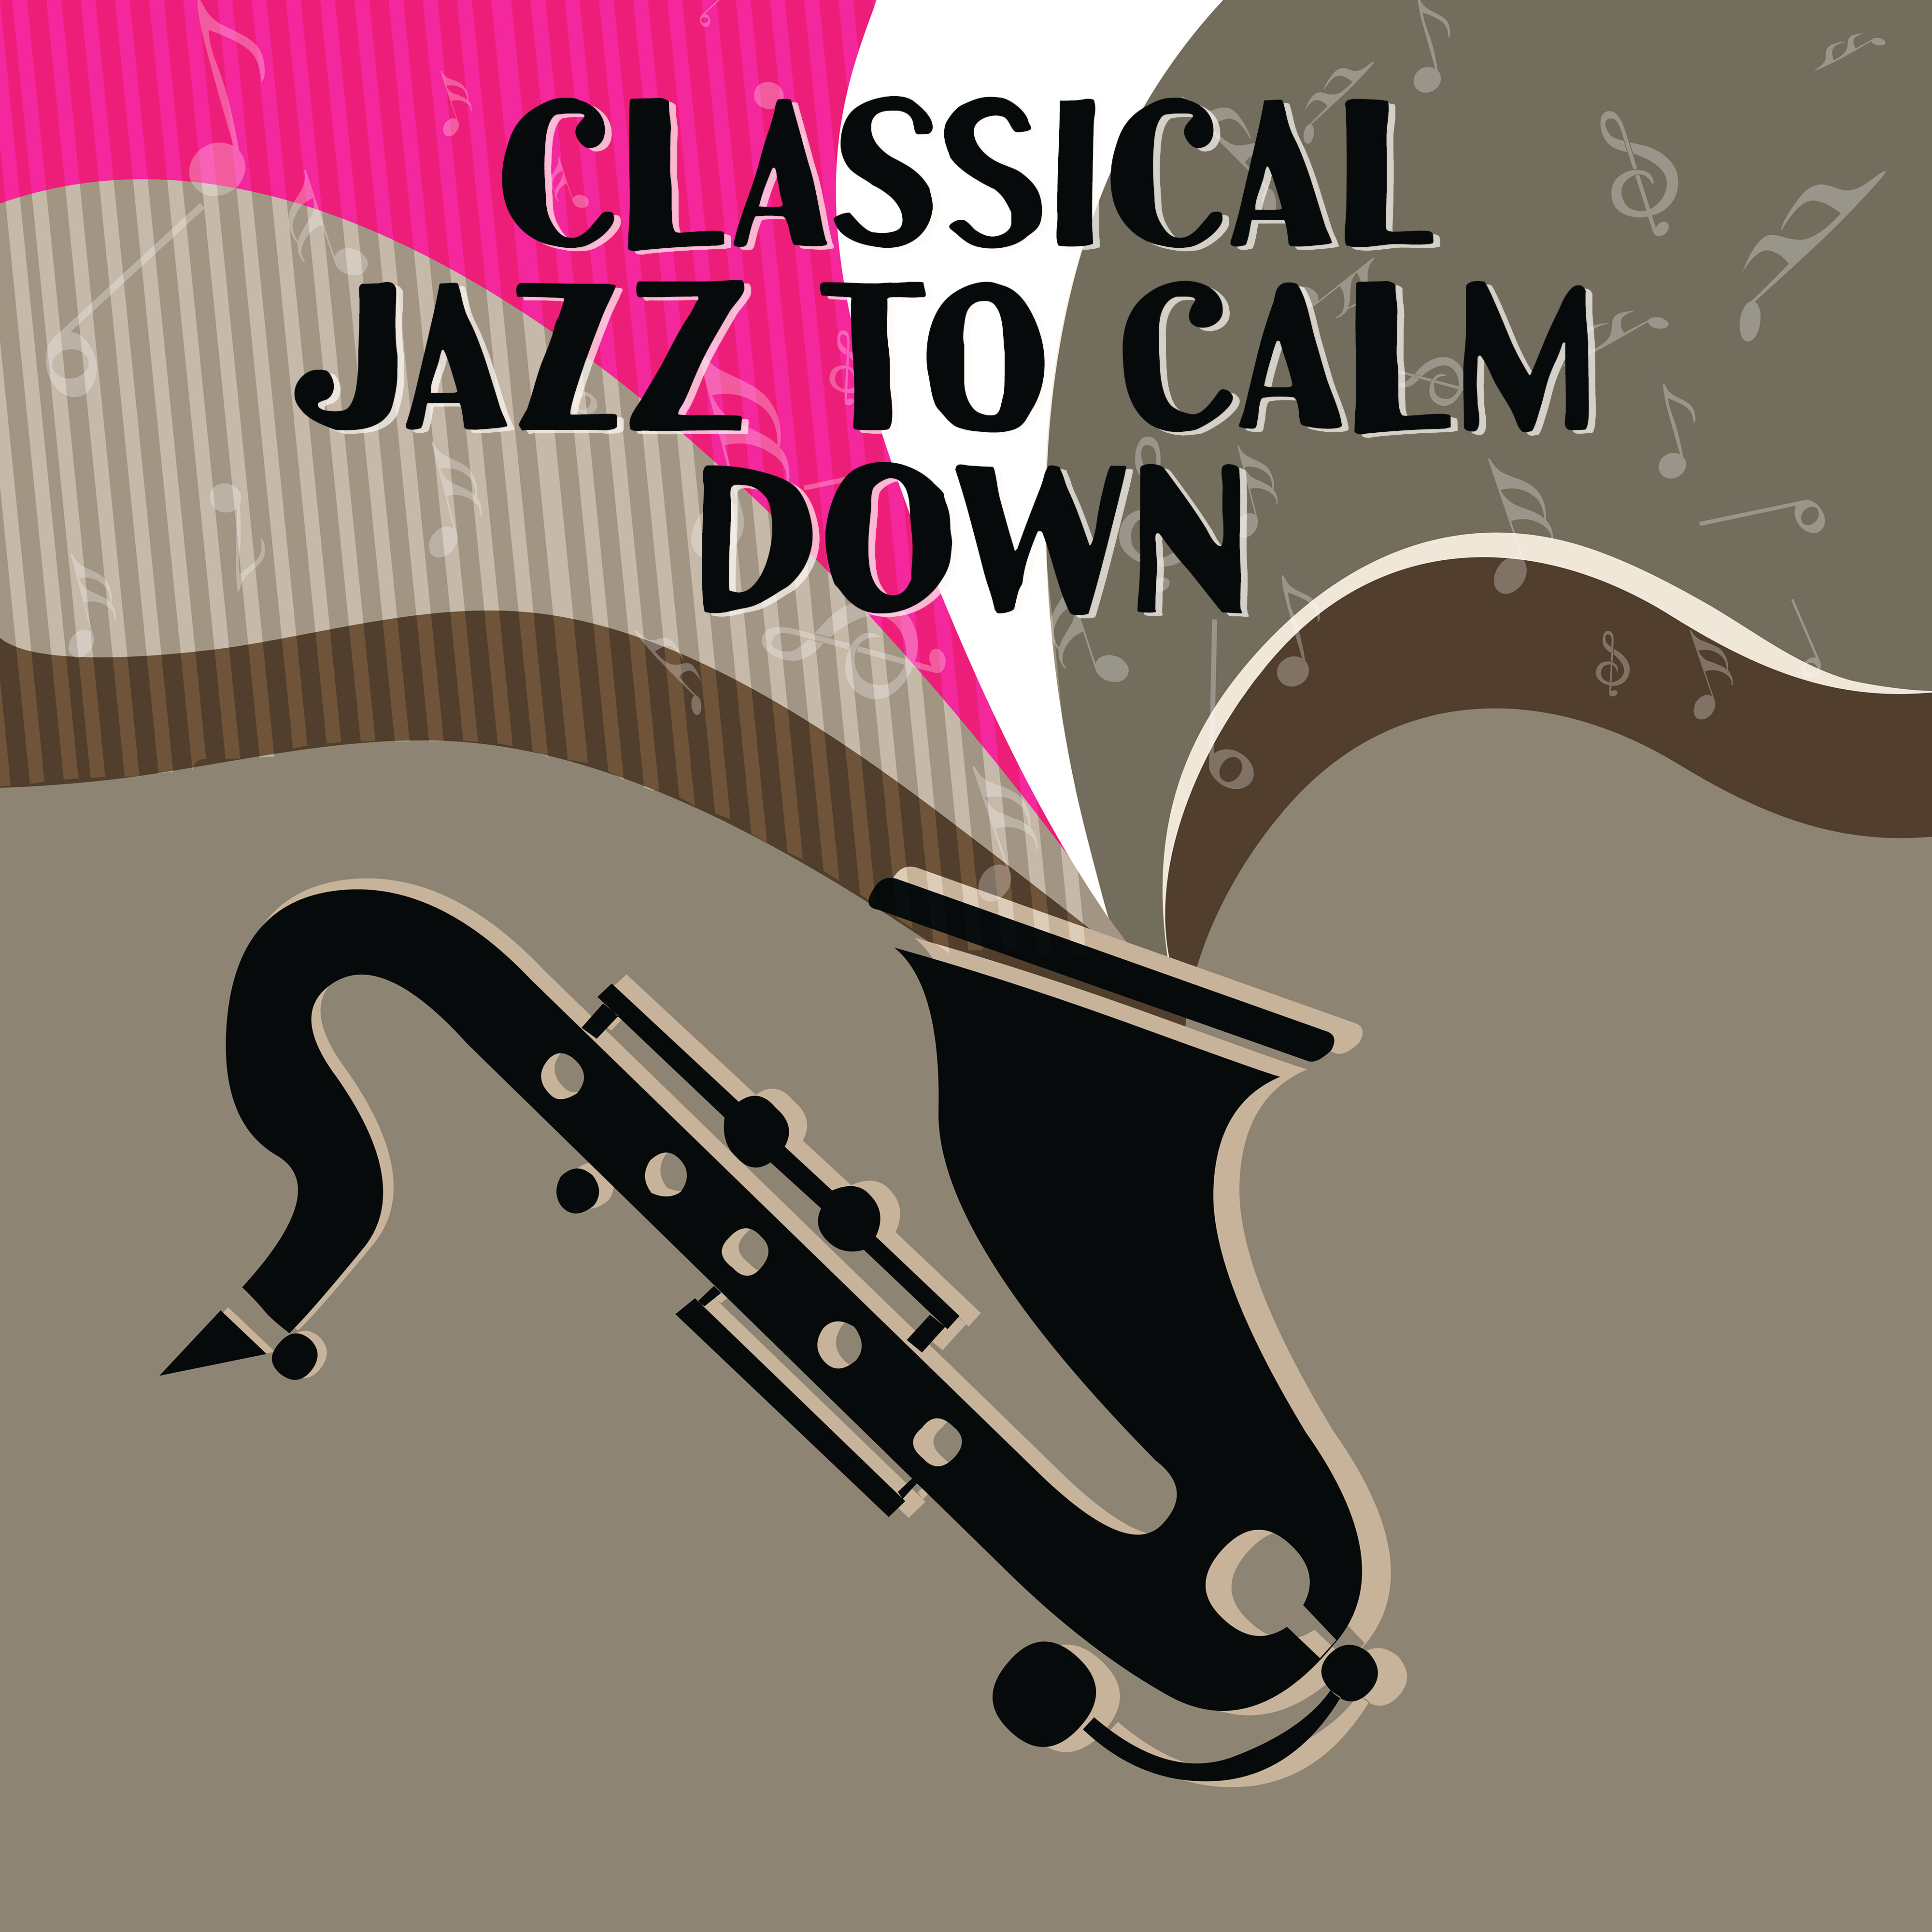 Classical Jazz to Calm Down